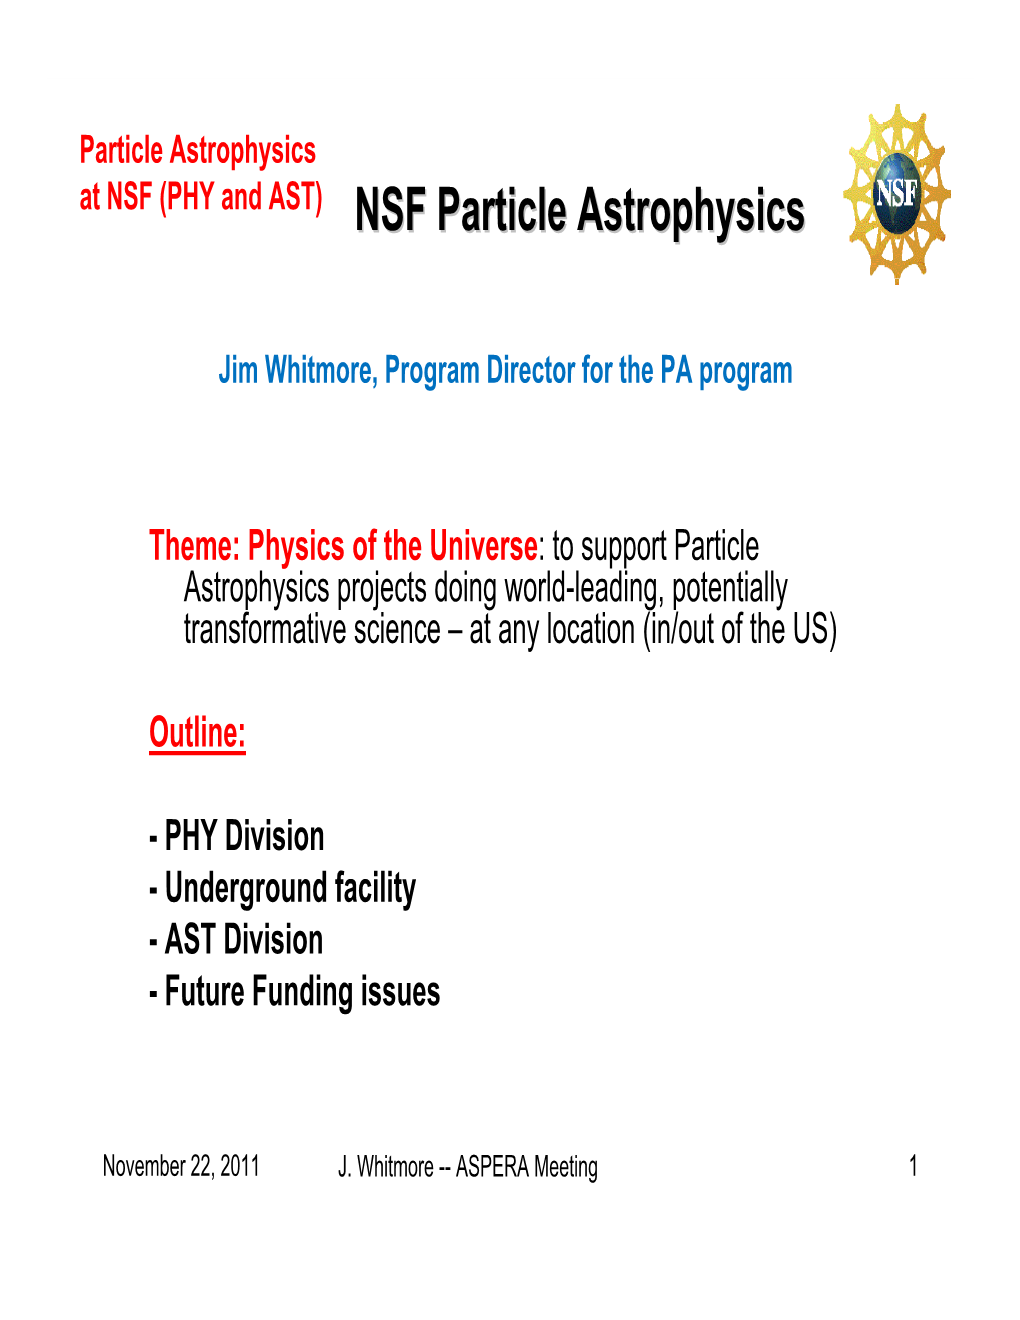 NSF Particle Astrophysics